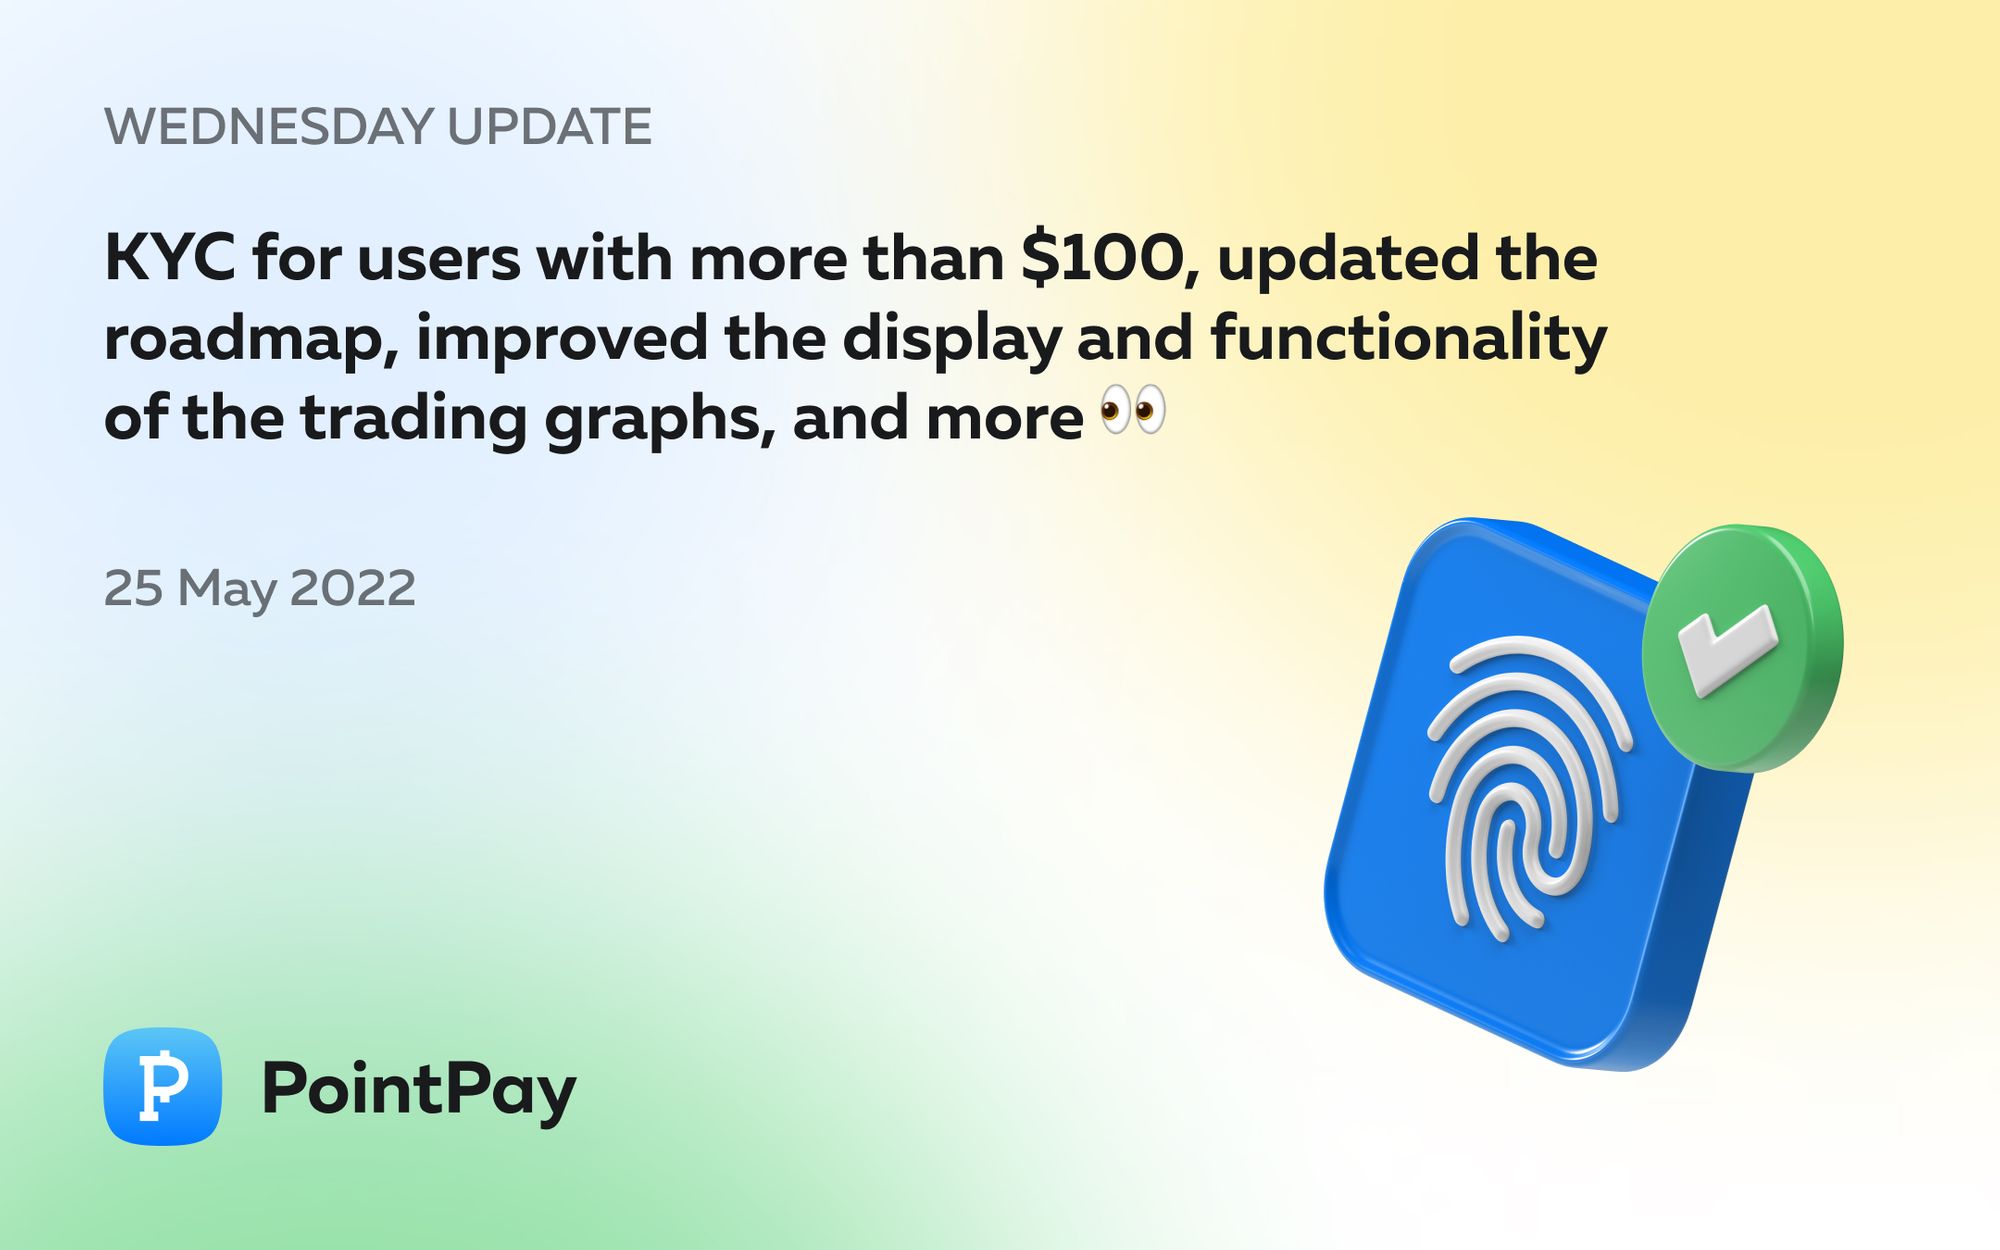 Wednesday Update from PointPay